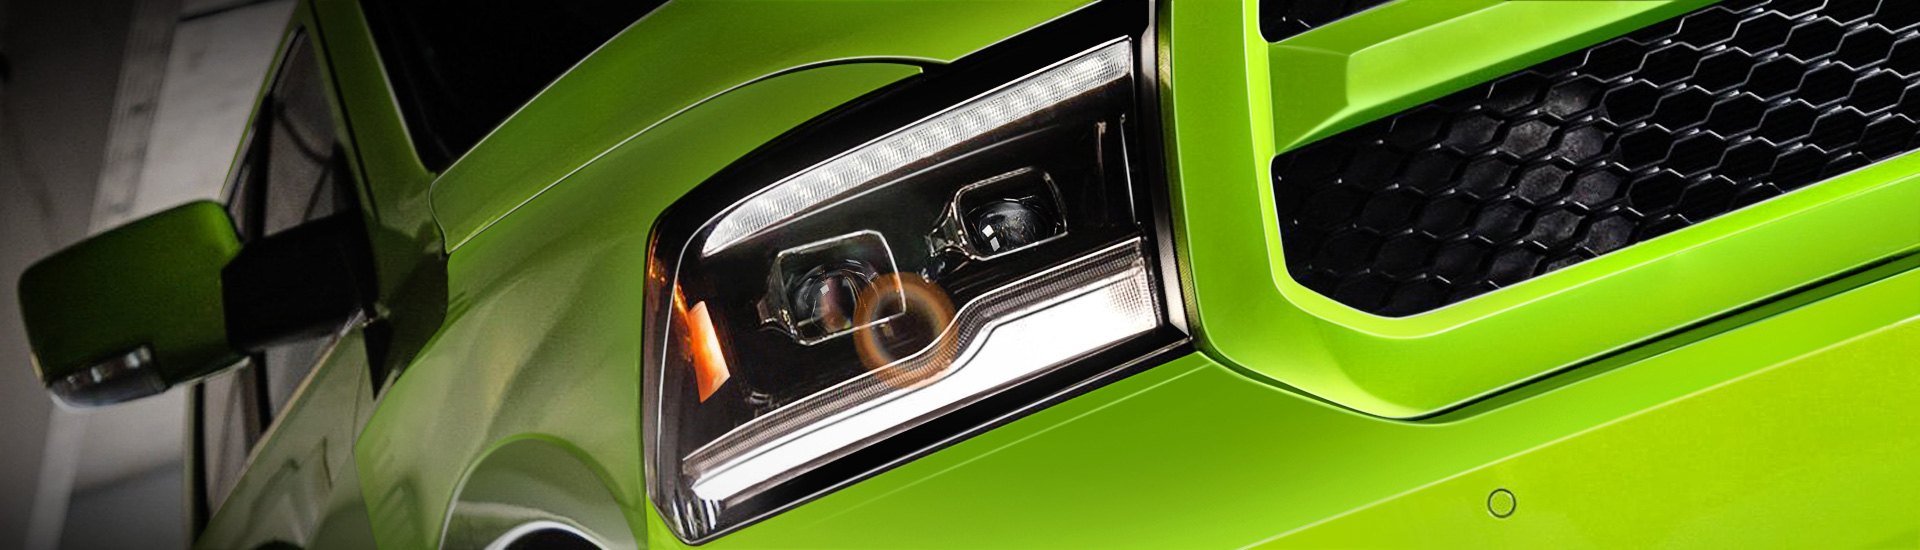 Revolutionary XB-Series DRL Bar Headlights by Morimoto for 09-18 Ram Are Open For Pre-Order